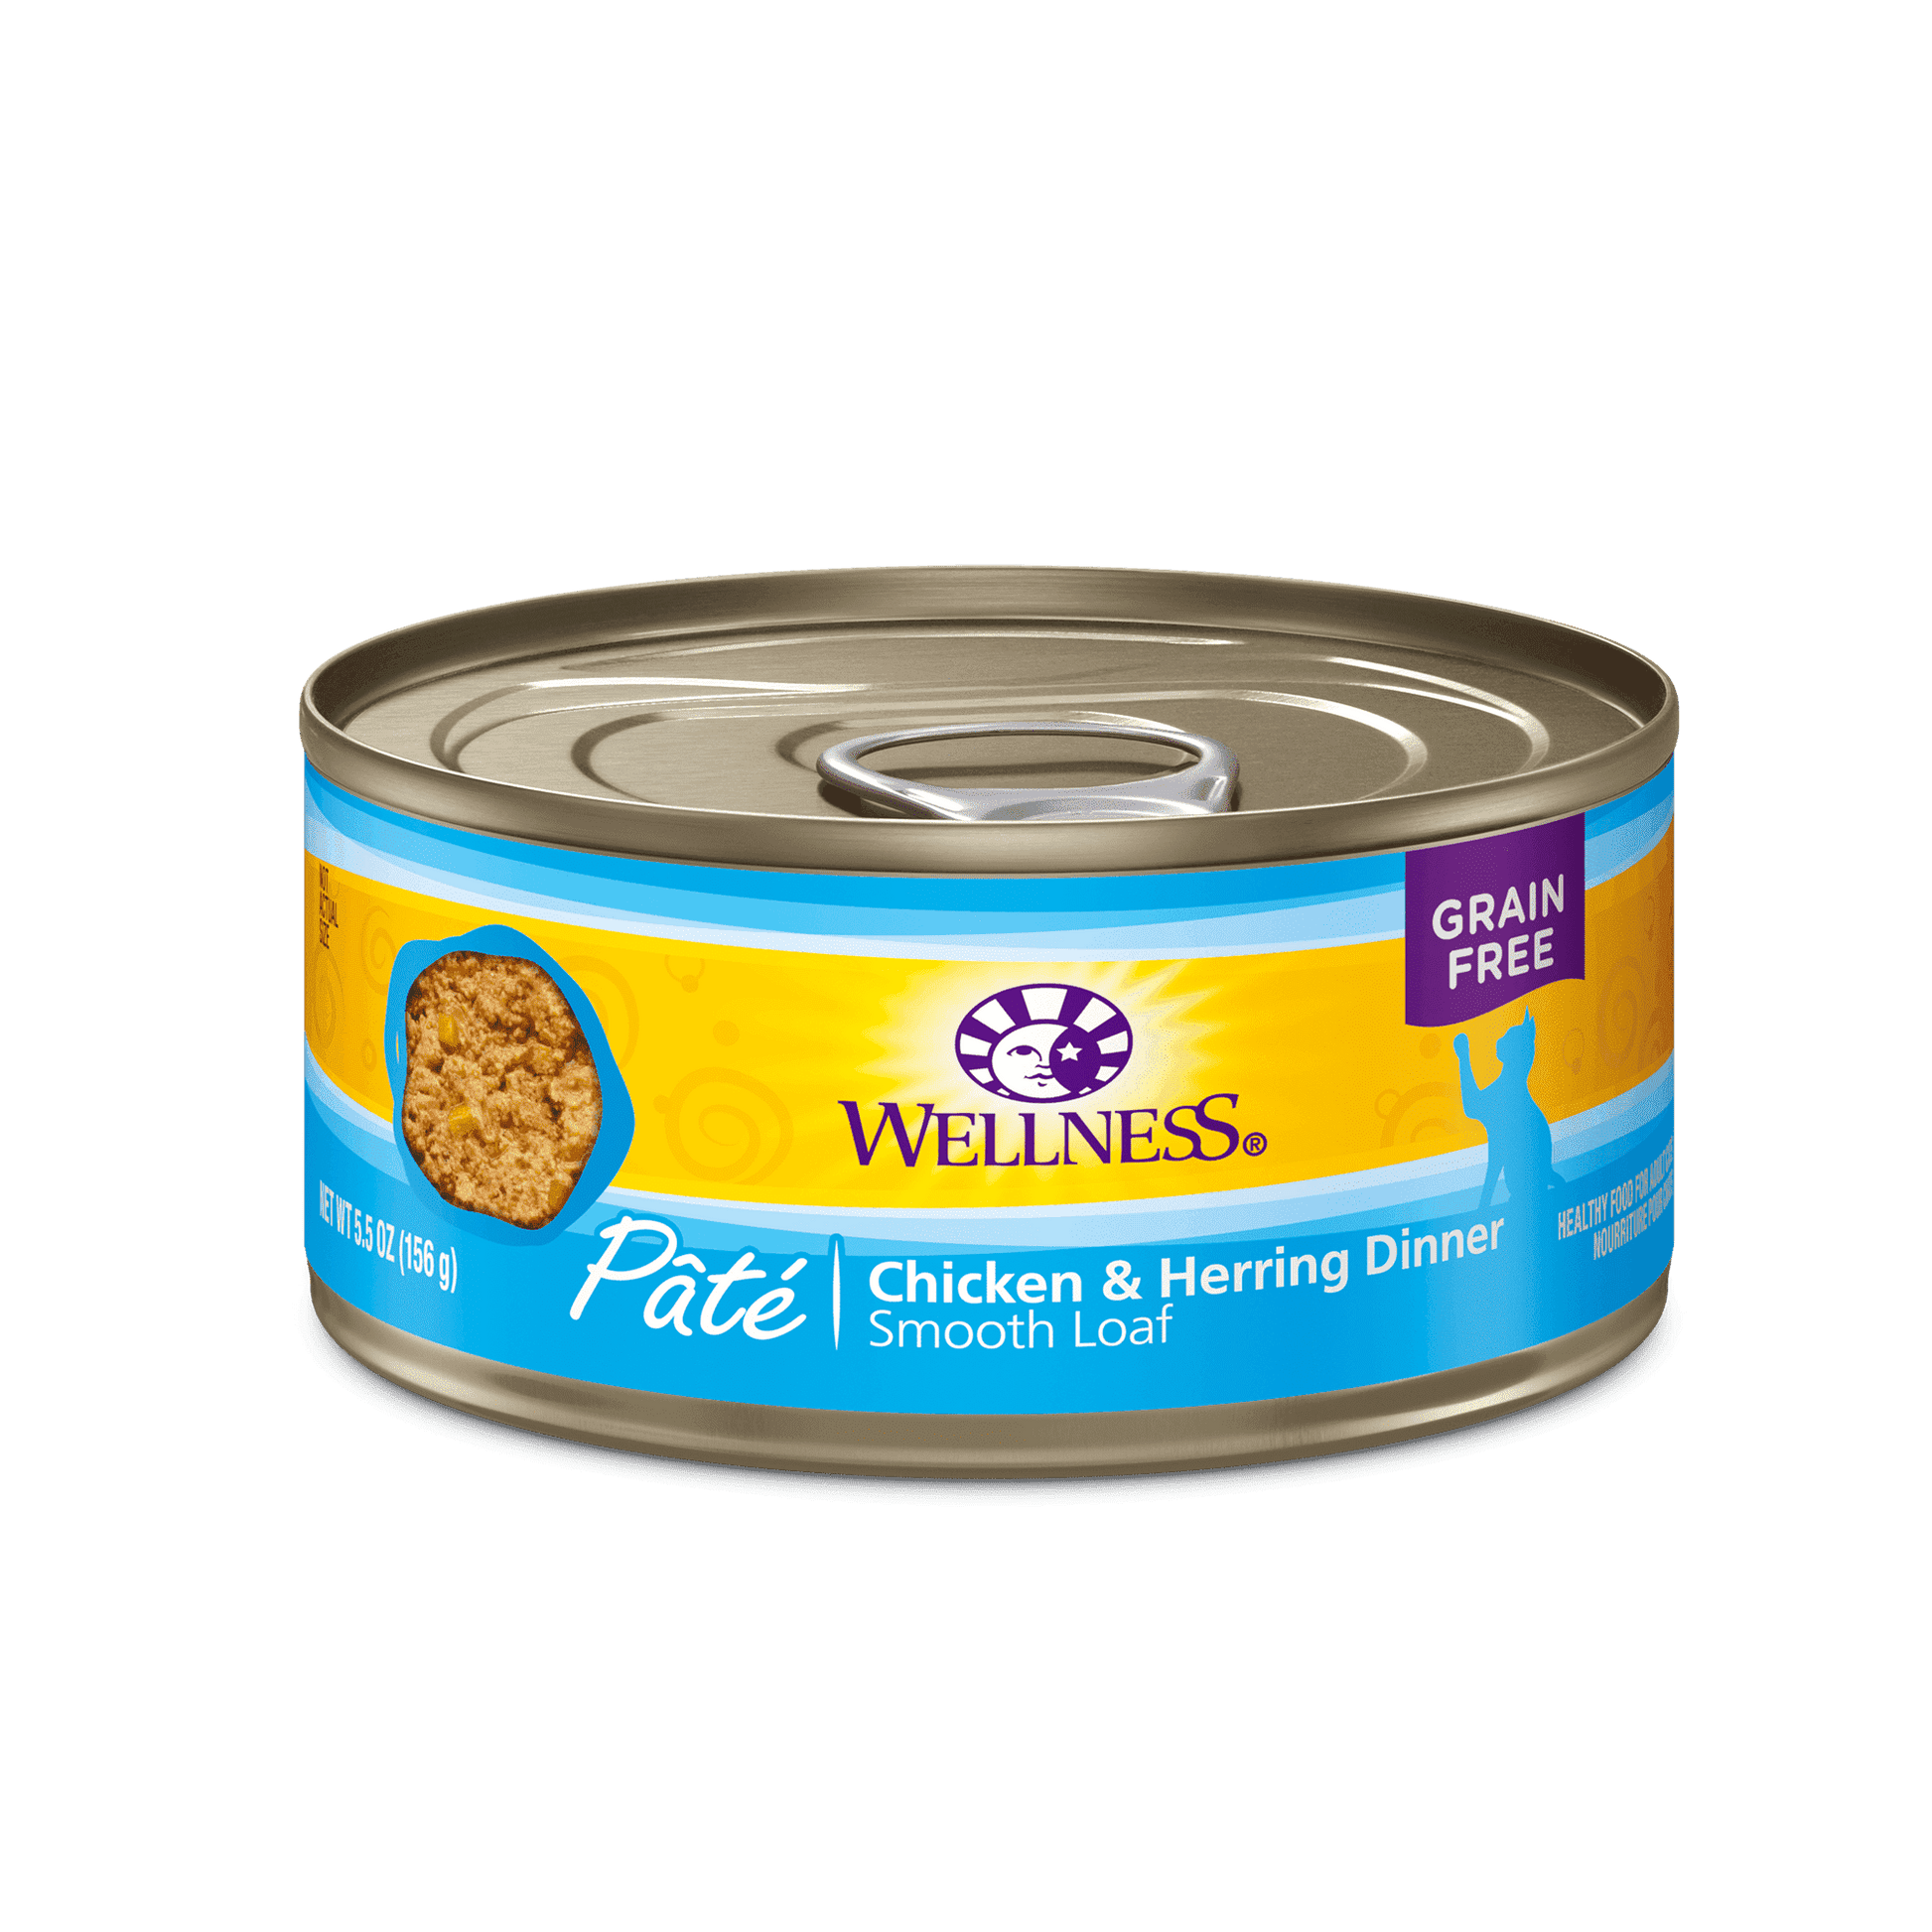 Wellness Complete Health Chicken & Herring Formula Grain-Free Canned Cat Food 155g Canned Cat Food 155g | PetMax Canada